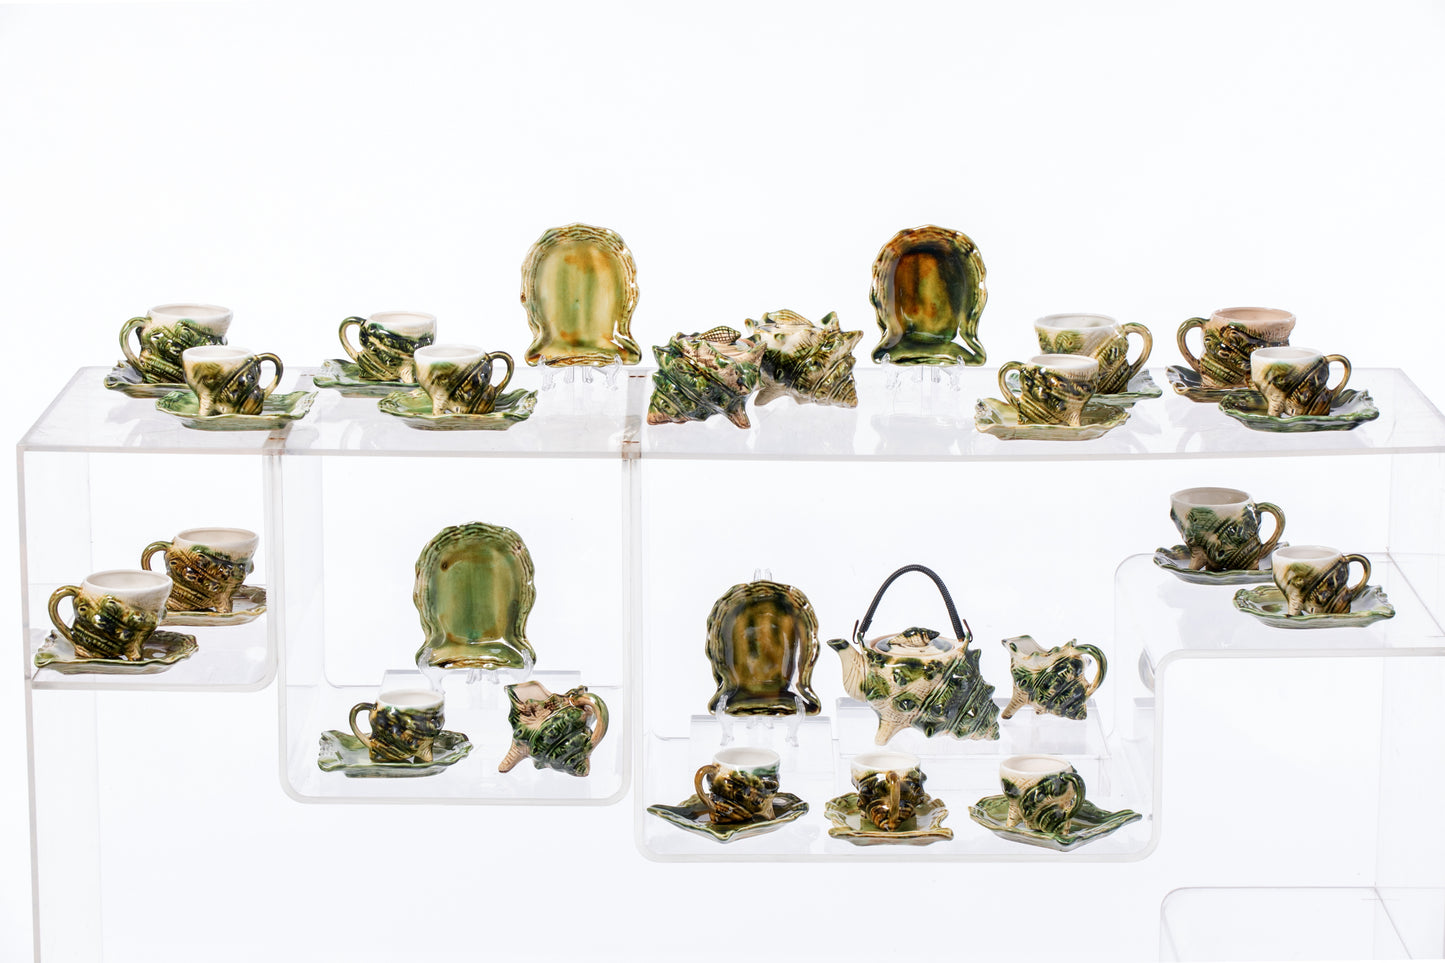 Hermit crab enamelled coffee service from the 60s